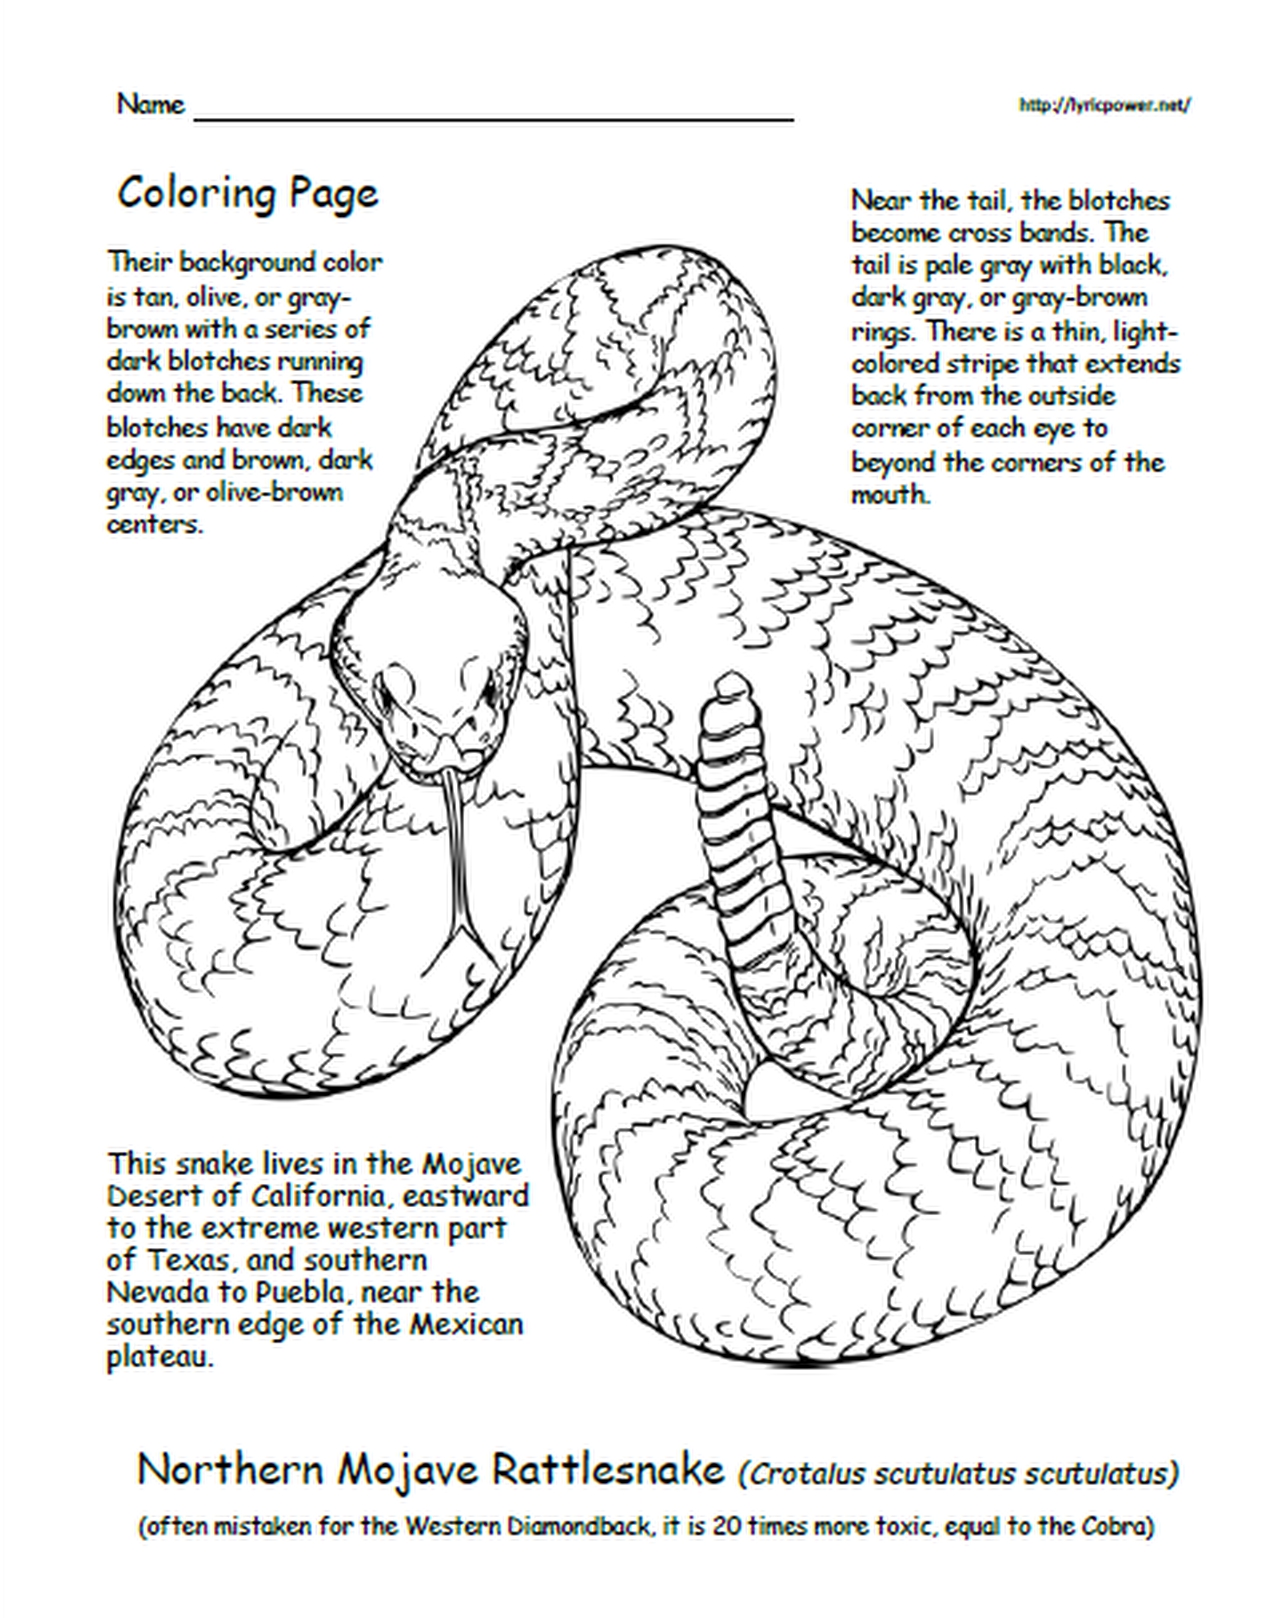 Black and white sketch of a rattlesnake, coloring page, for Northern Mojave Rattler